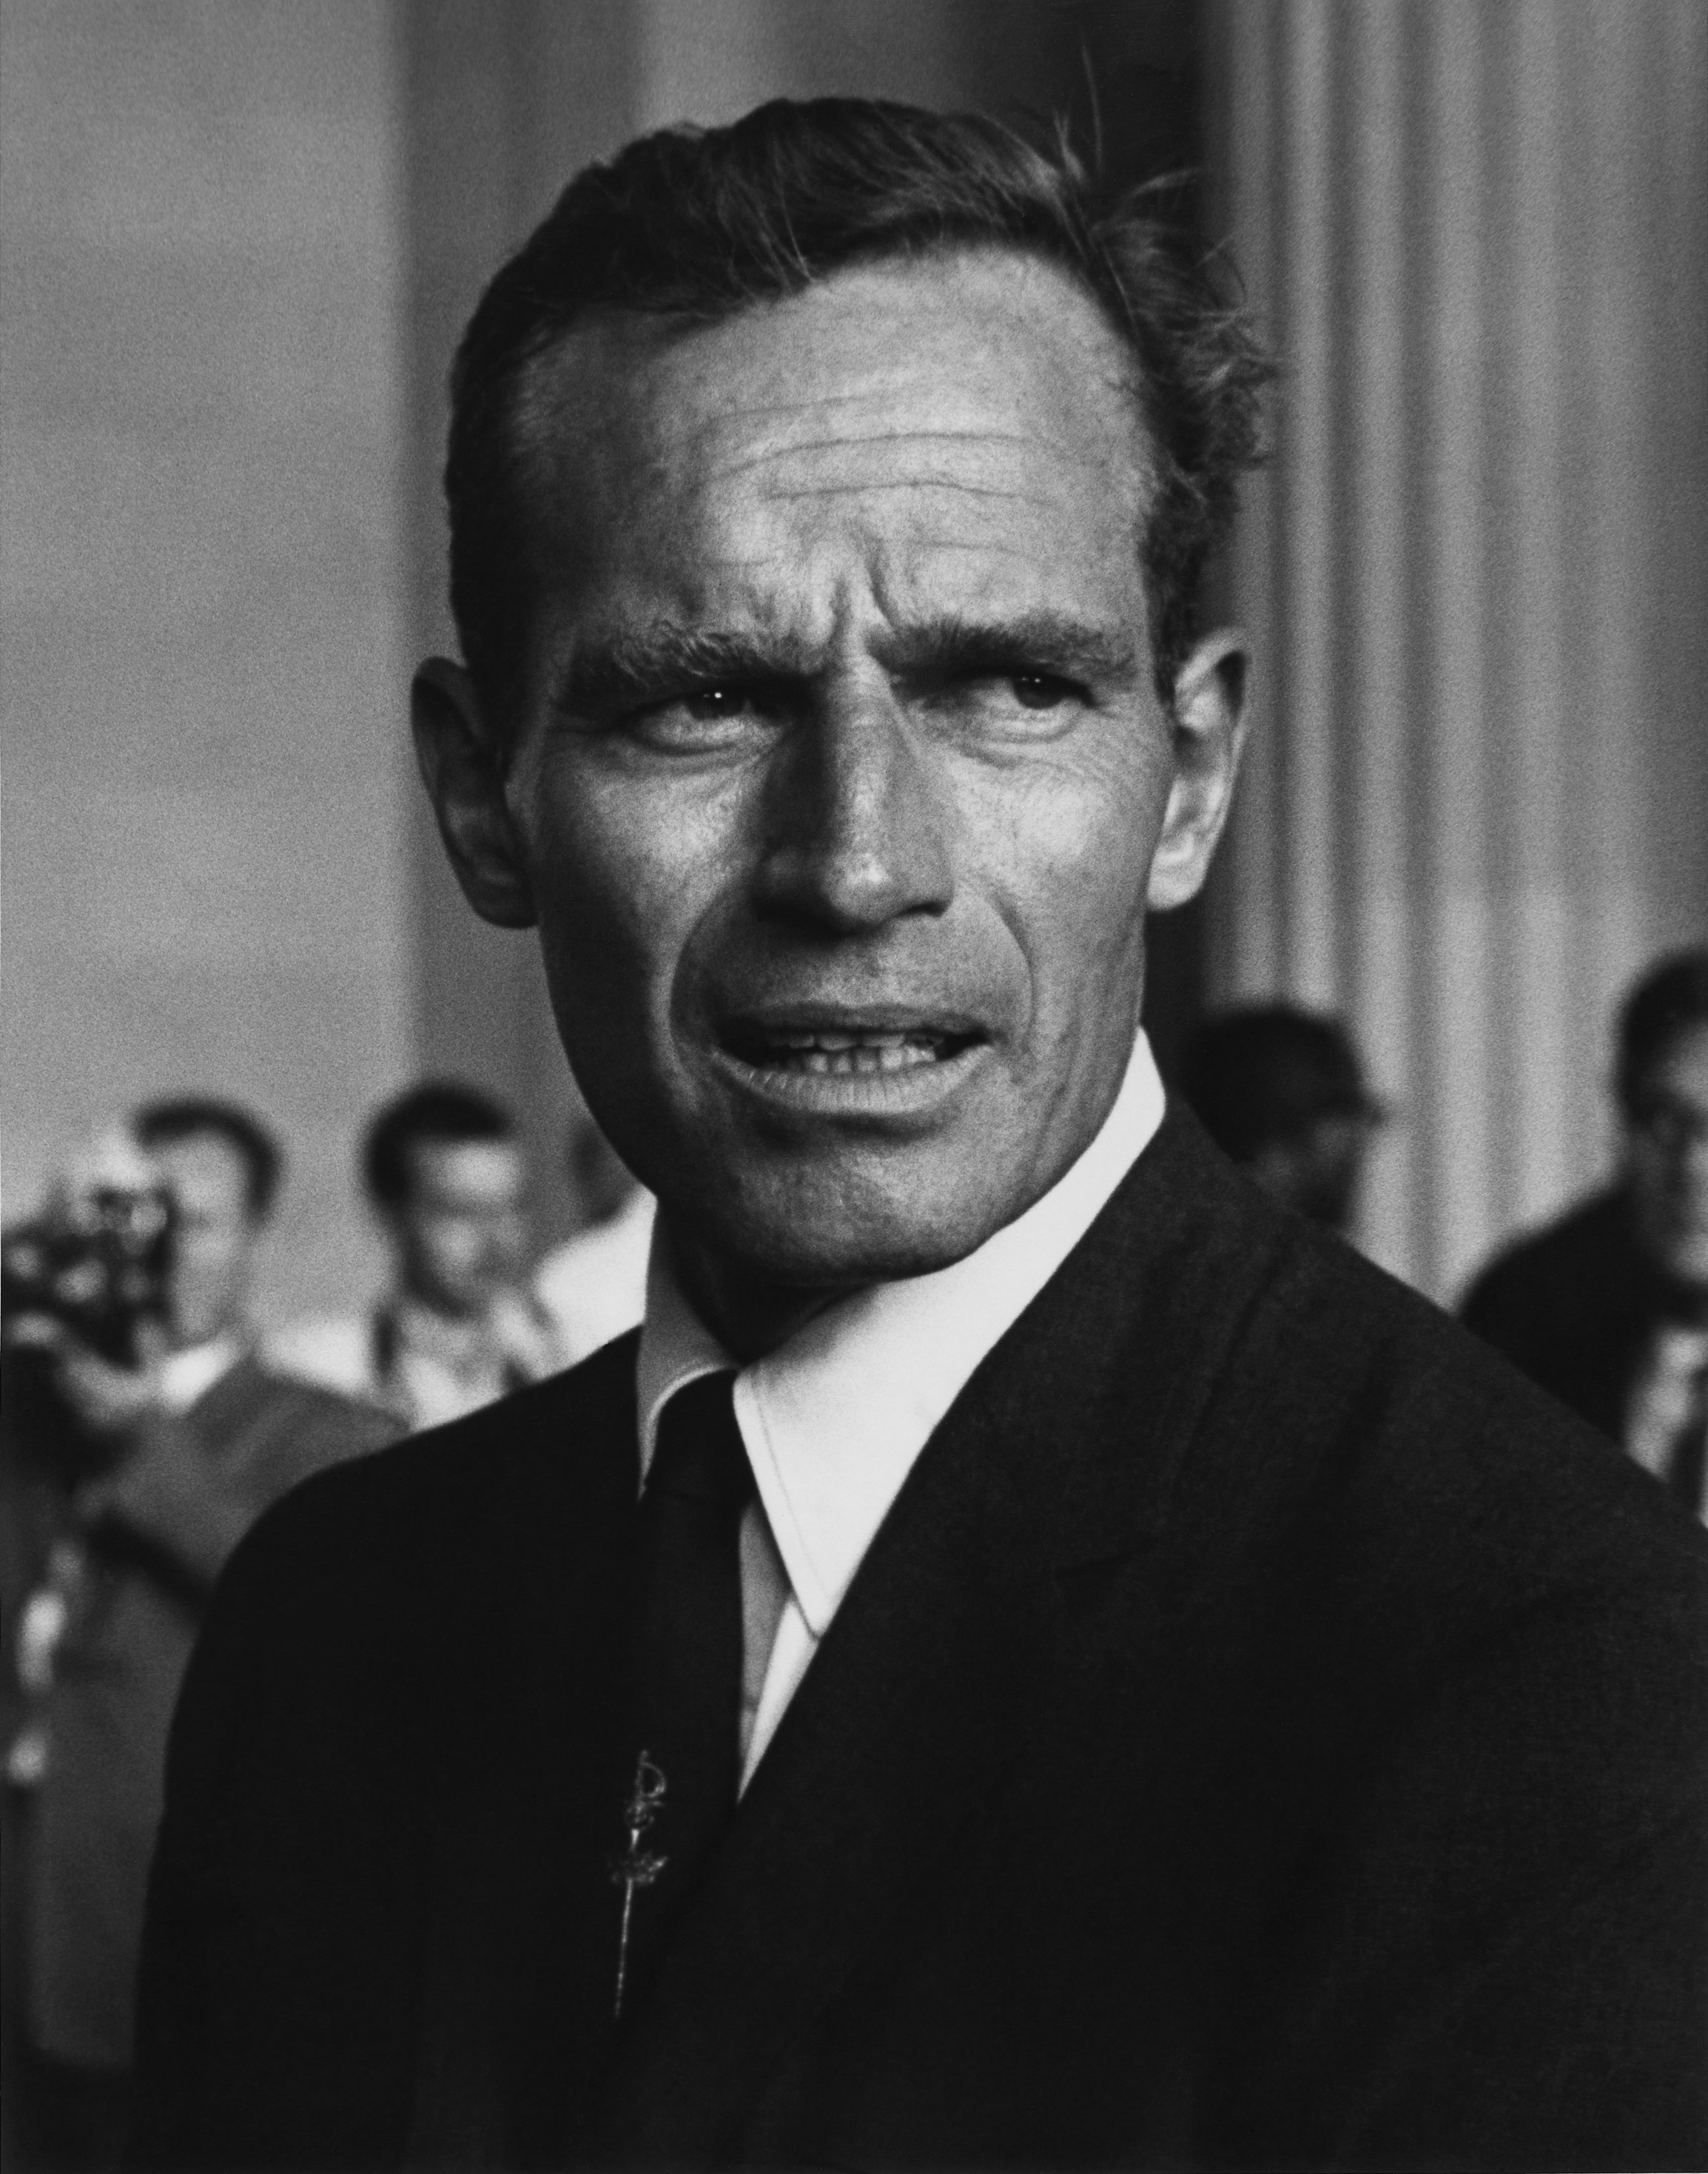 Charlton Heston at the Civil Rights March in Washington, D.C. in August 1963. | Source: Wikimedia Commons